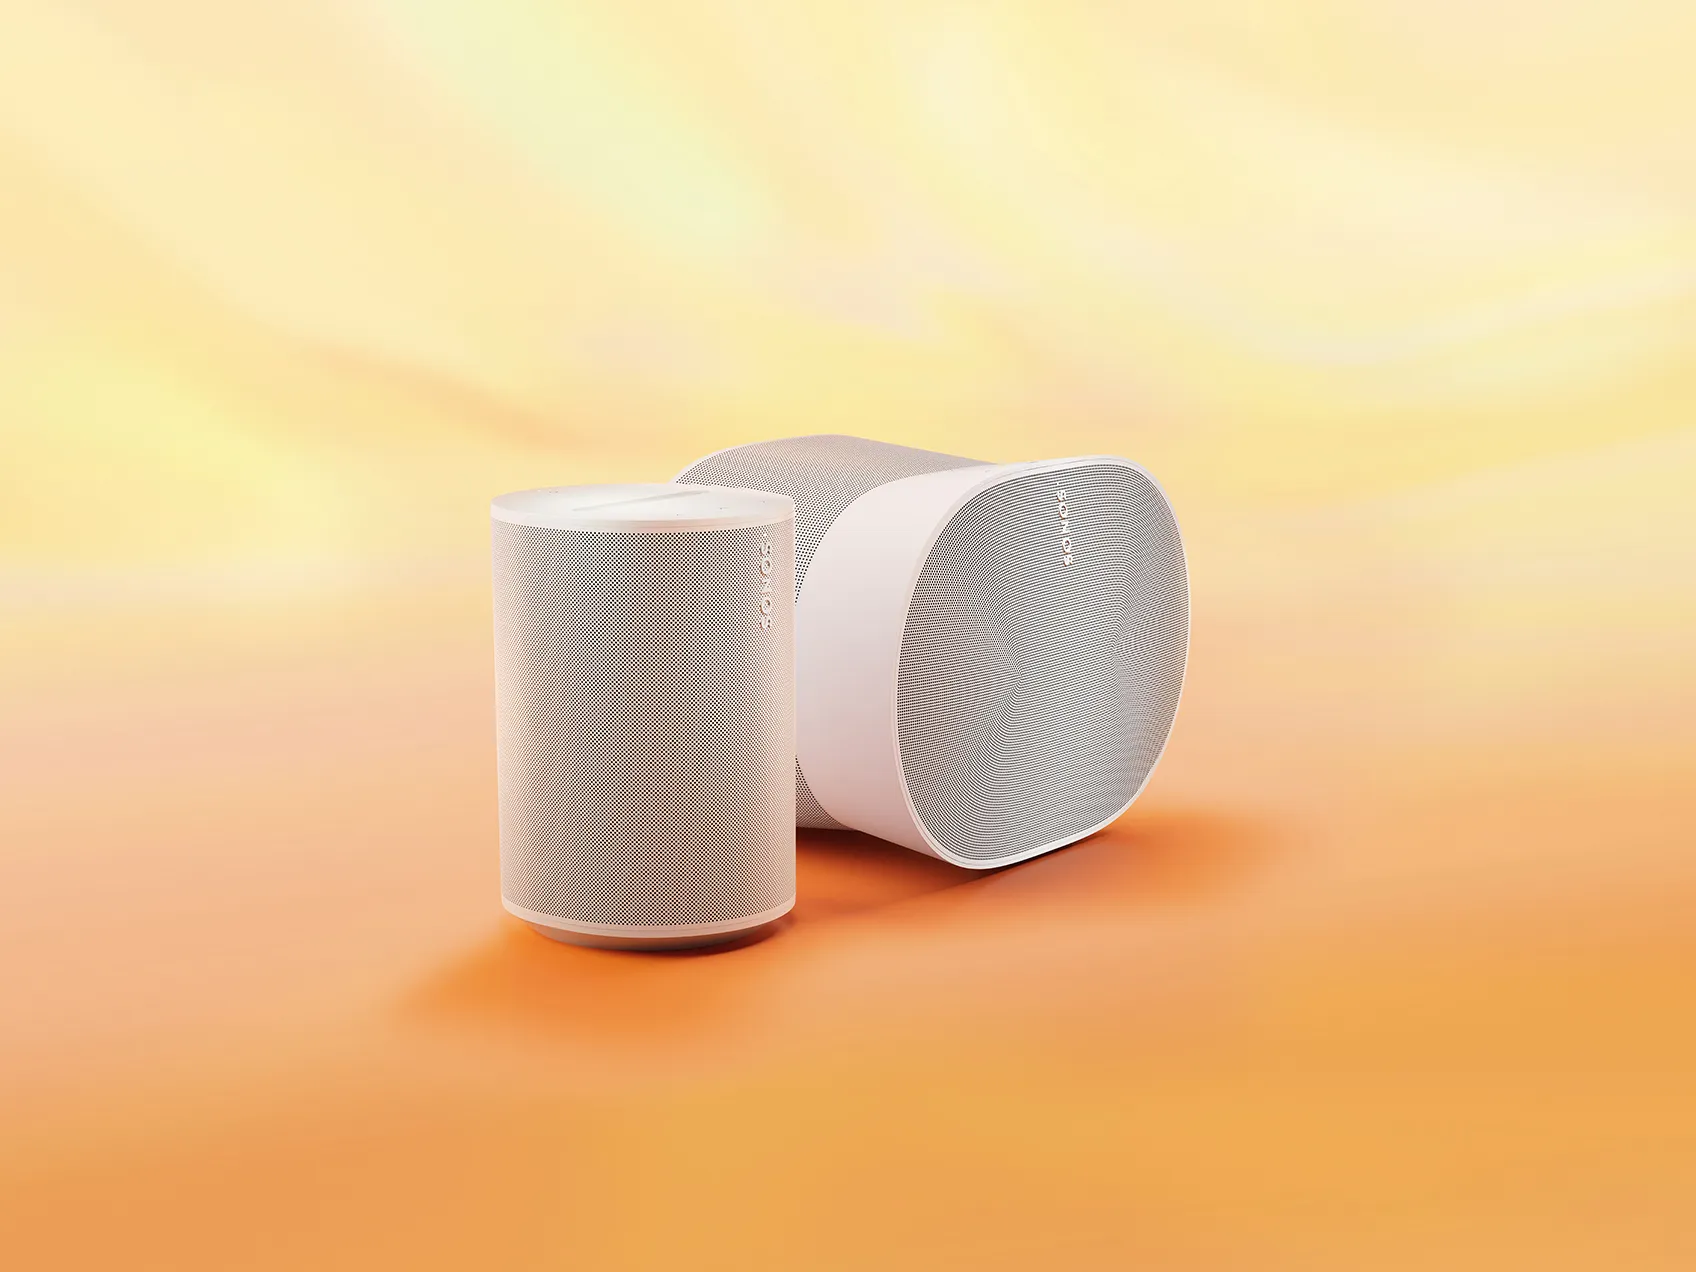 Sonos Teacher Discount | Education Discount on Sonos Wireless Speakers & Home Sound Systems